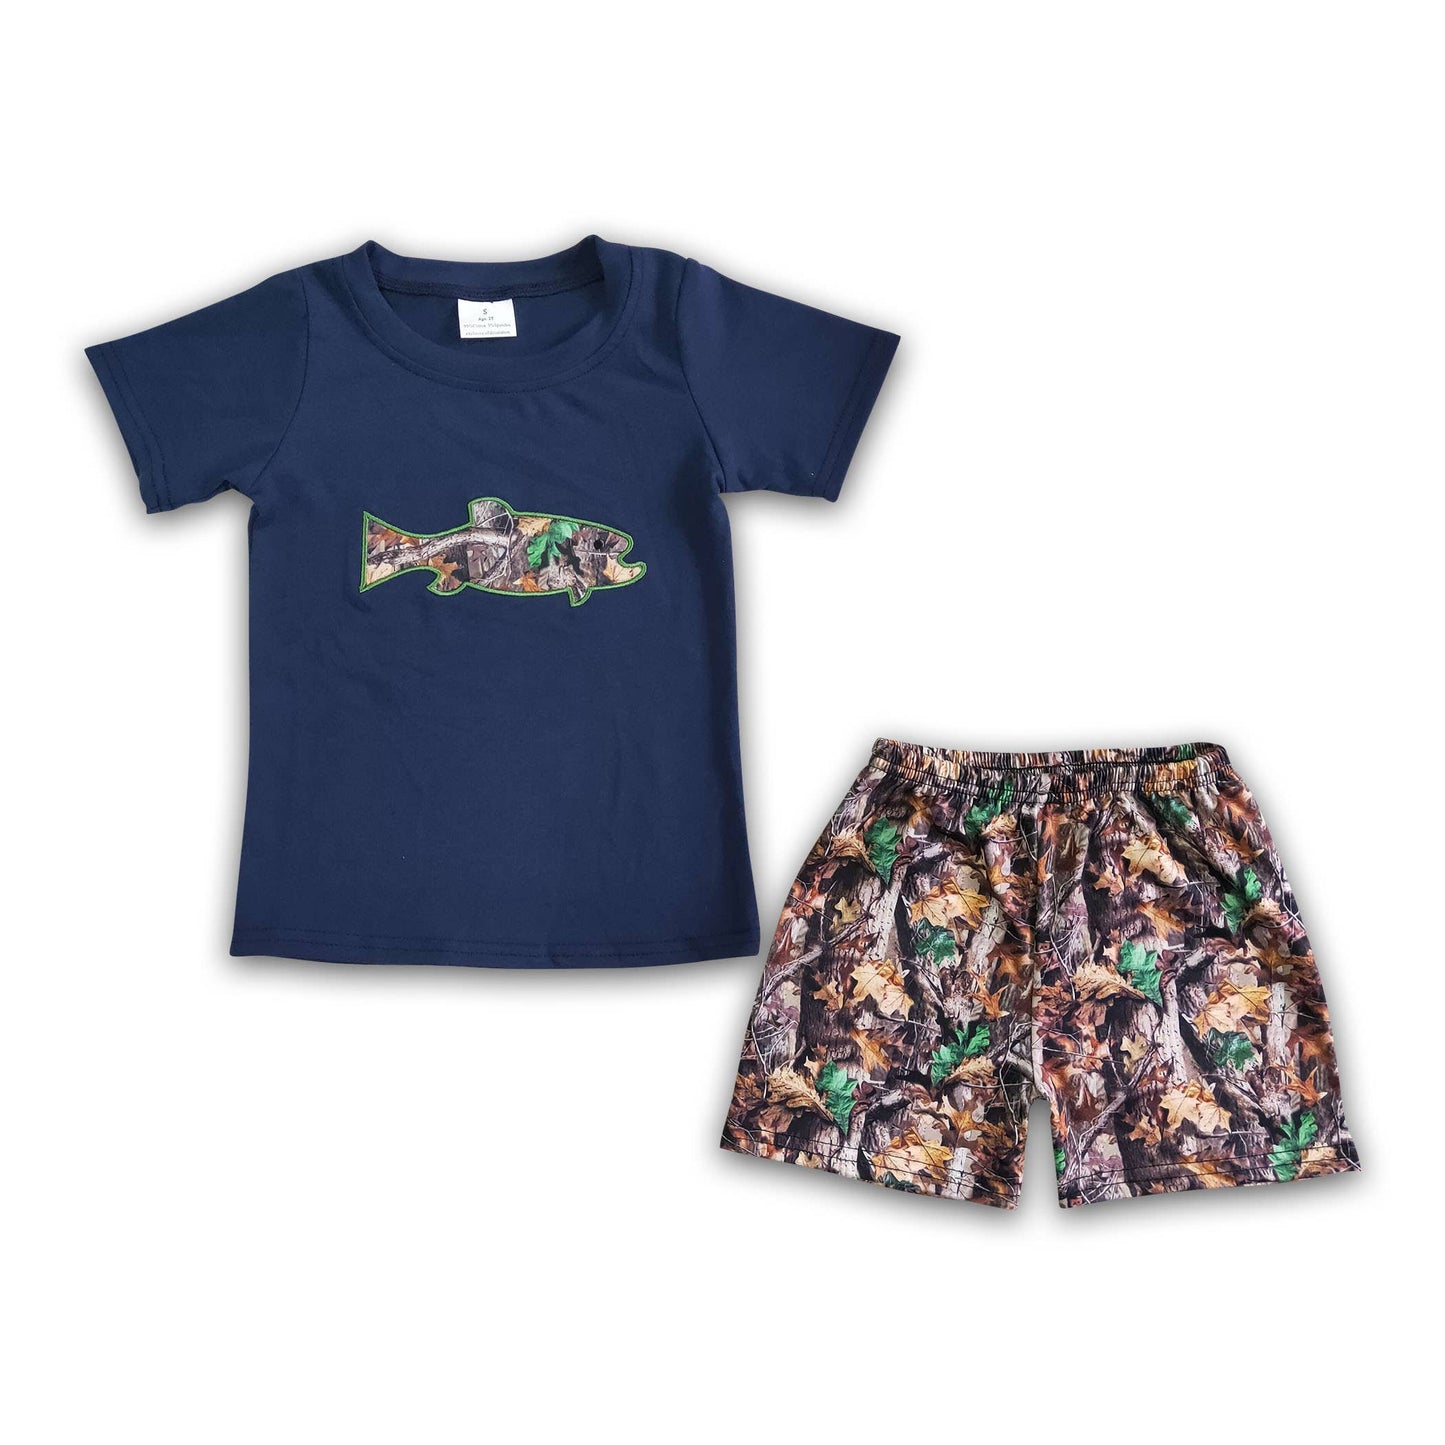 Fish embroidery cotton shirt camo shorts boy summer clothing     - Chickie Collective